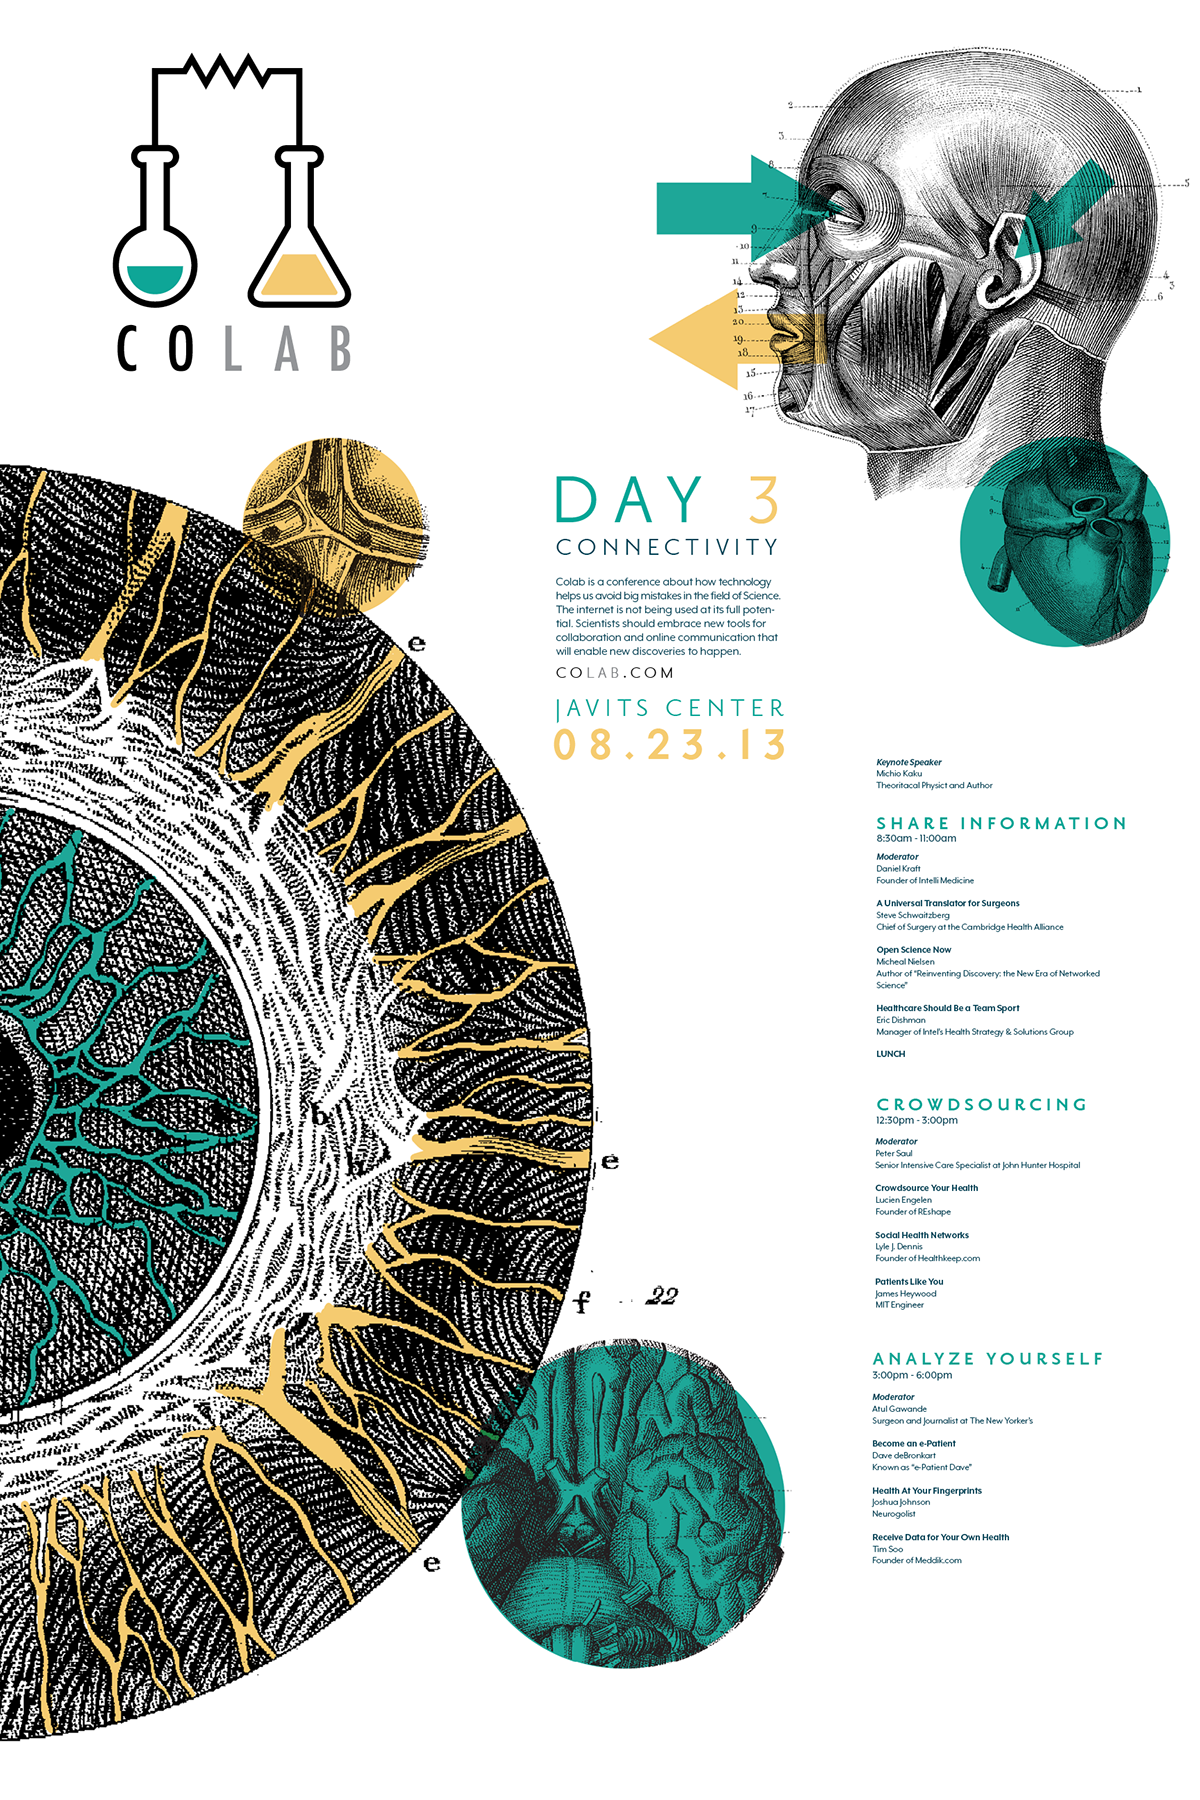 colab conference science medicine forensics Body Parts scientific connectivity eye brain old illustration Technology poster logo identity